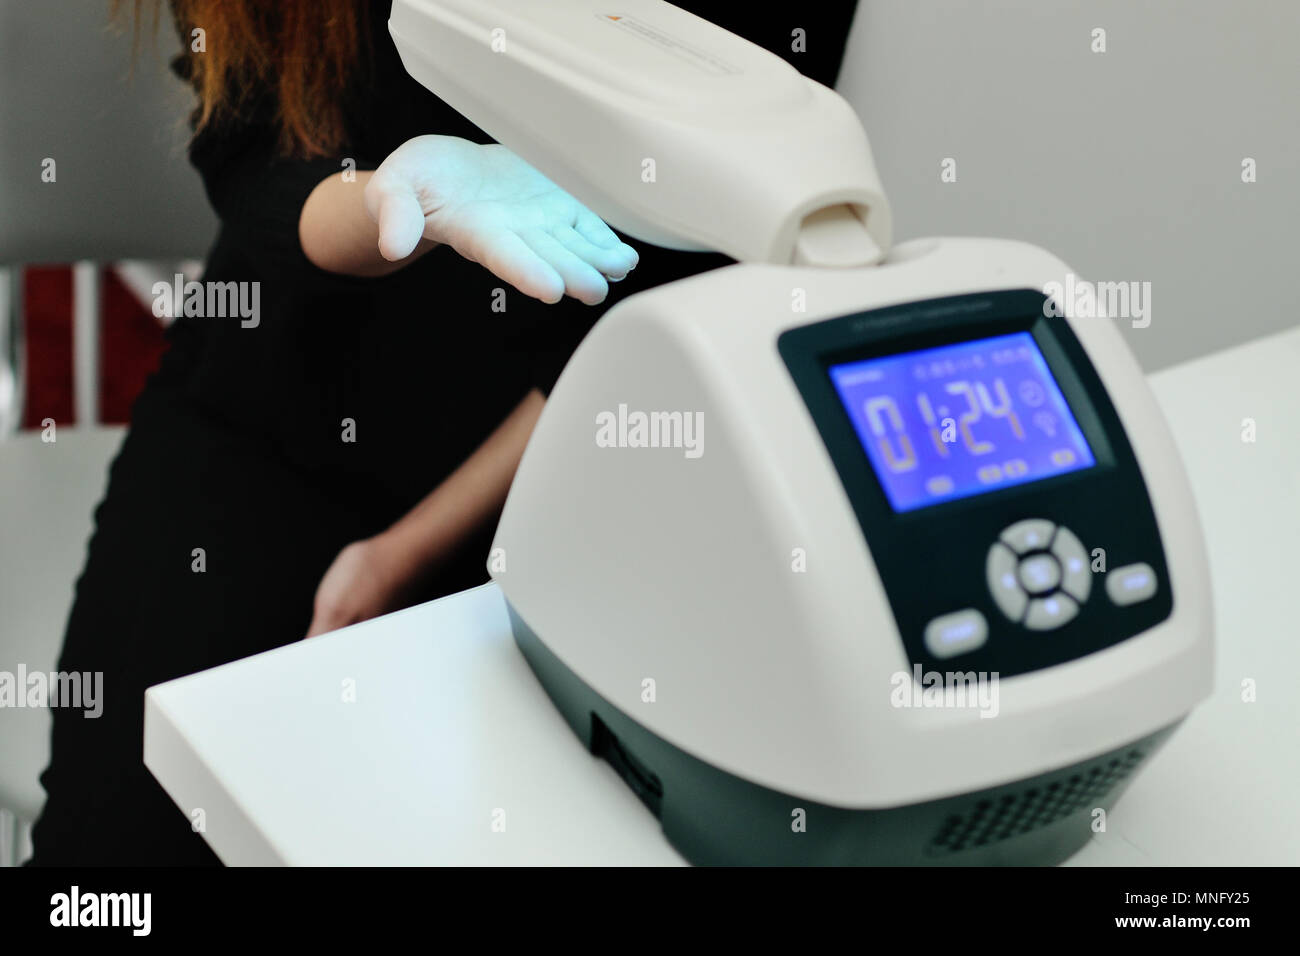 treatment of skin diseases using light therapy. Stock Photo